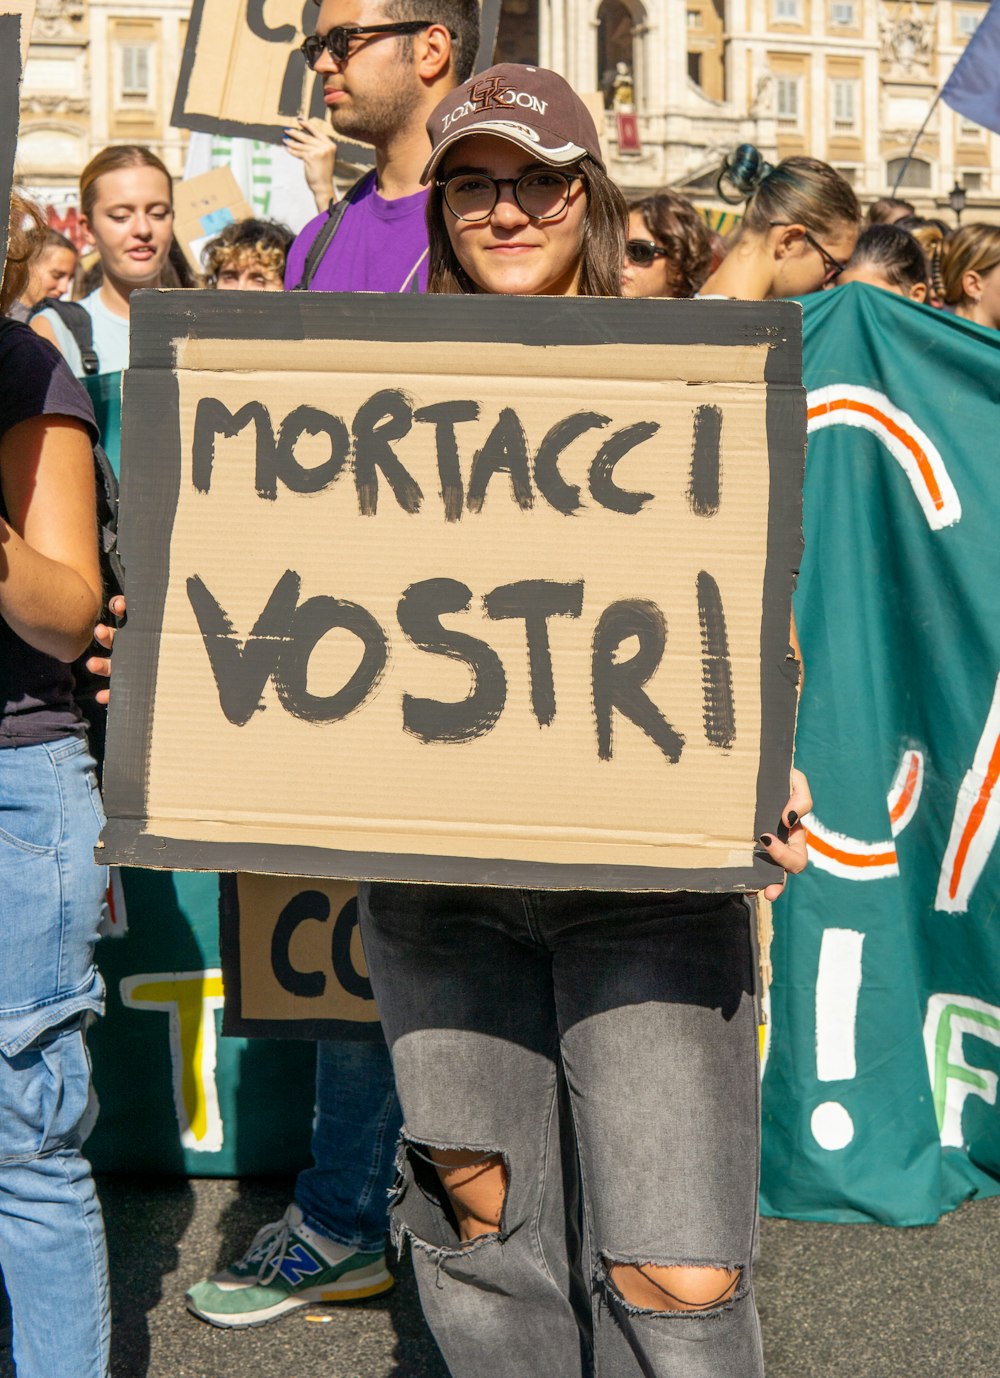 a woman holding a sign in front of a crowd